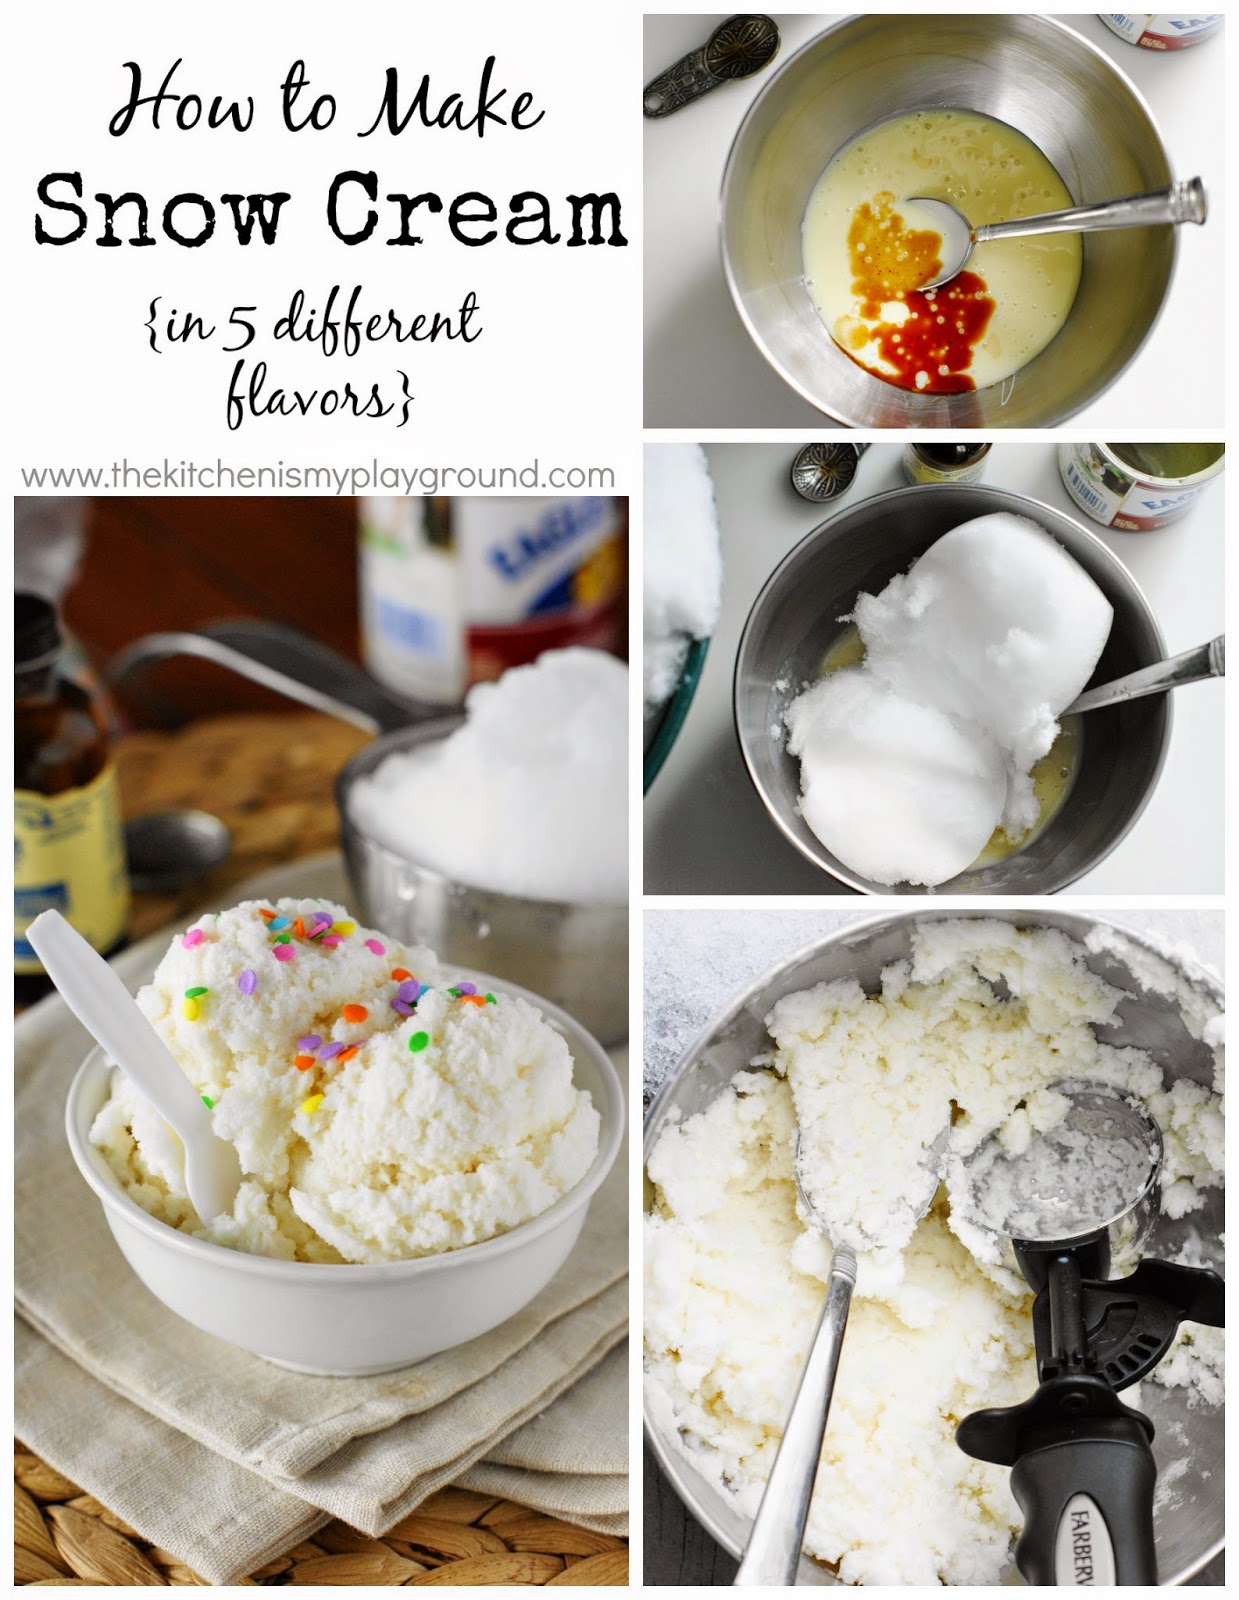 How to Make Snow Cream in 5 Different Flavors image